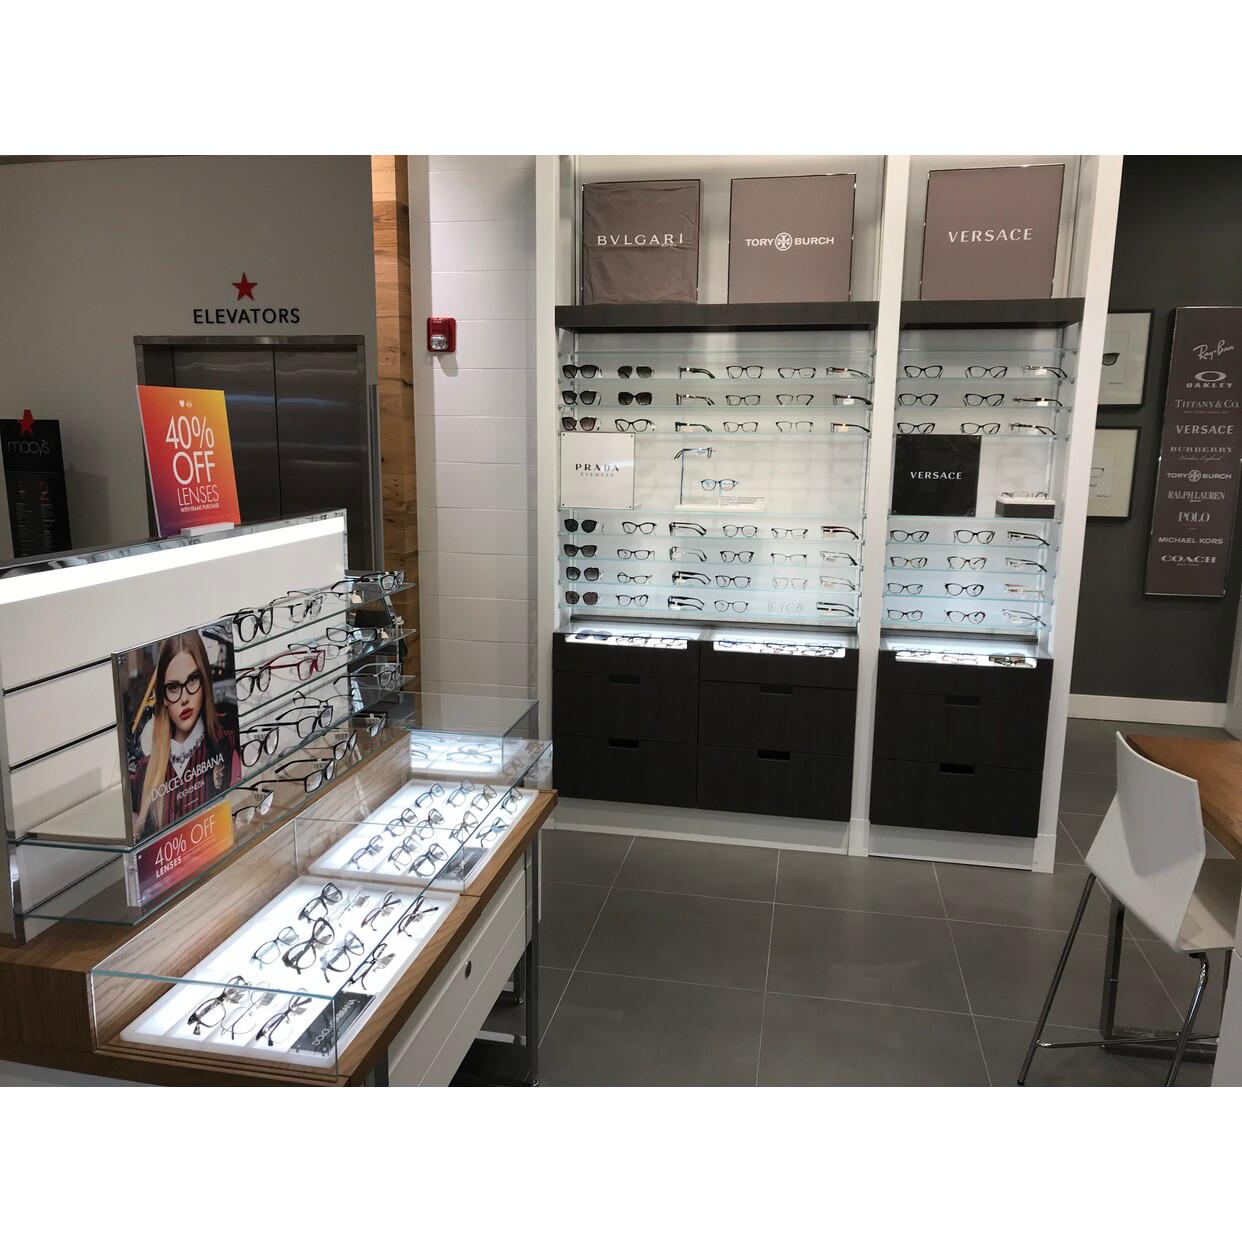 LensCrafters at Macy's, Columbus | Health Services